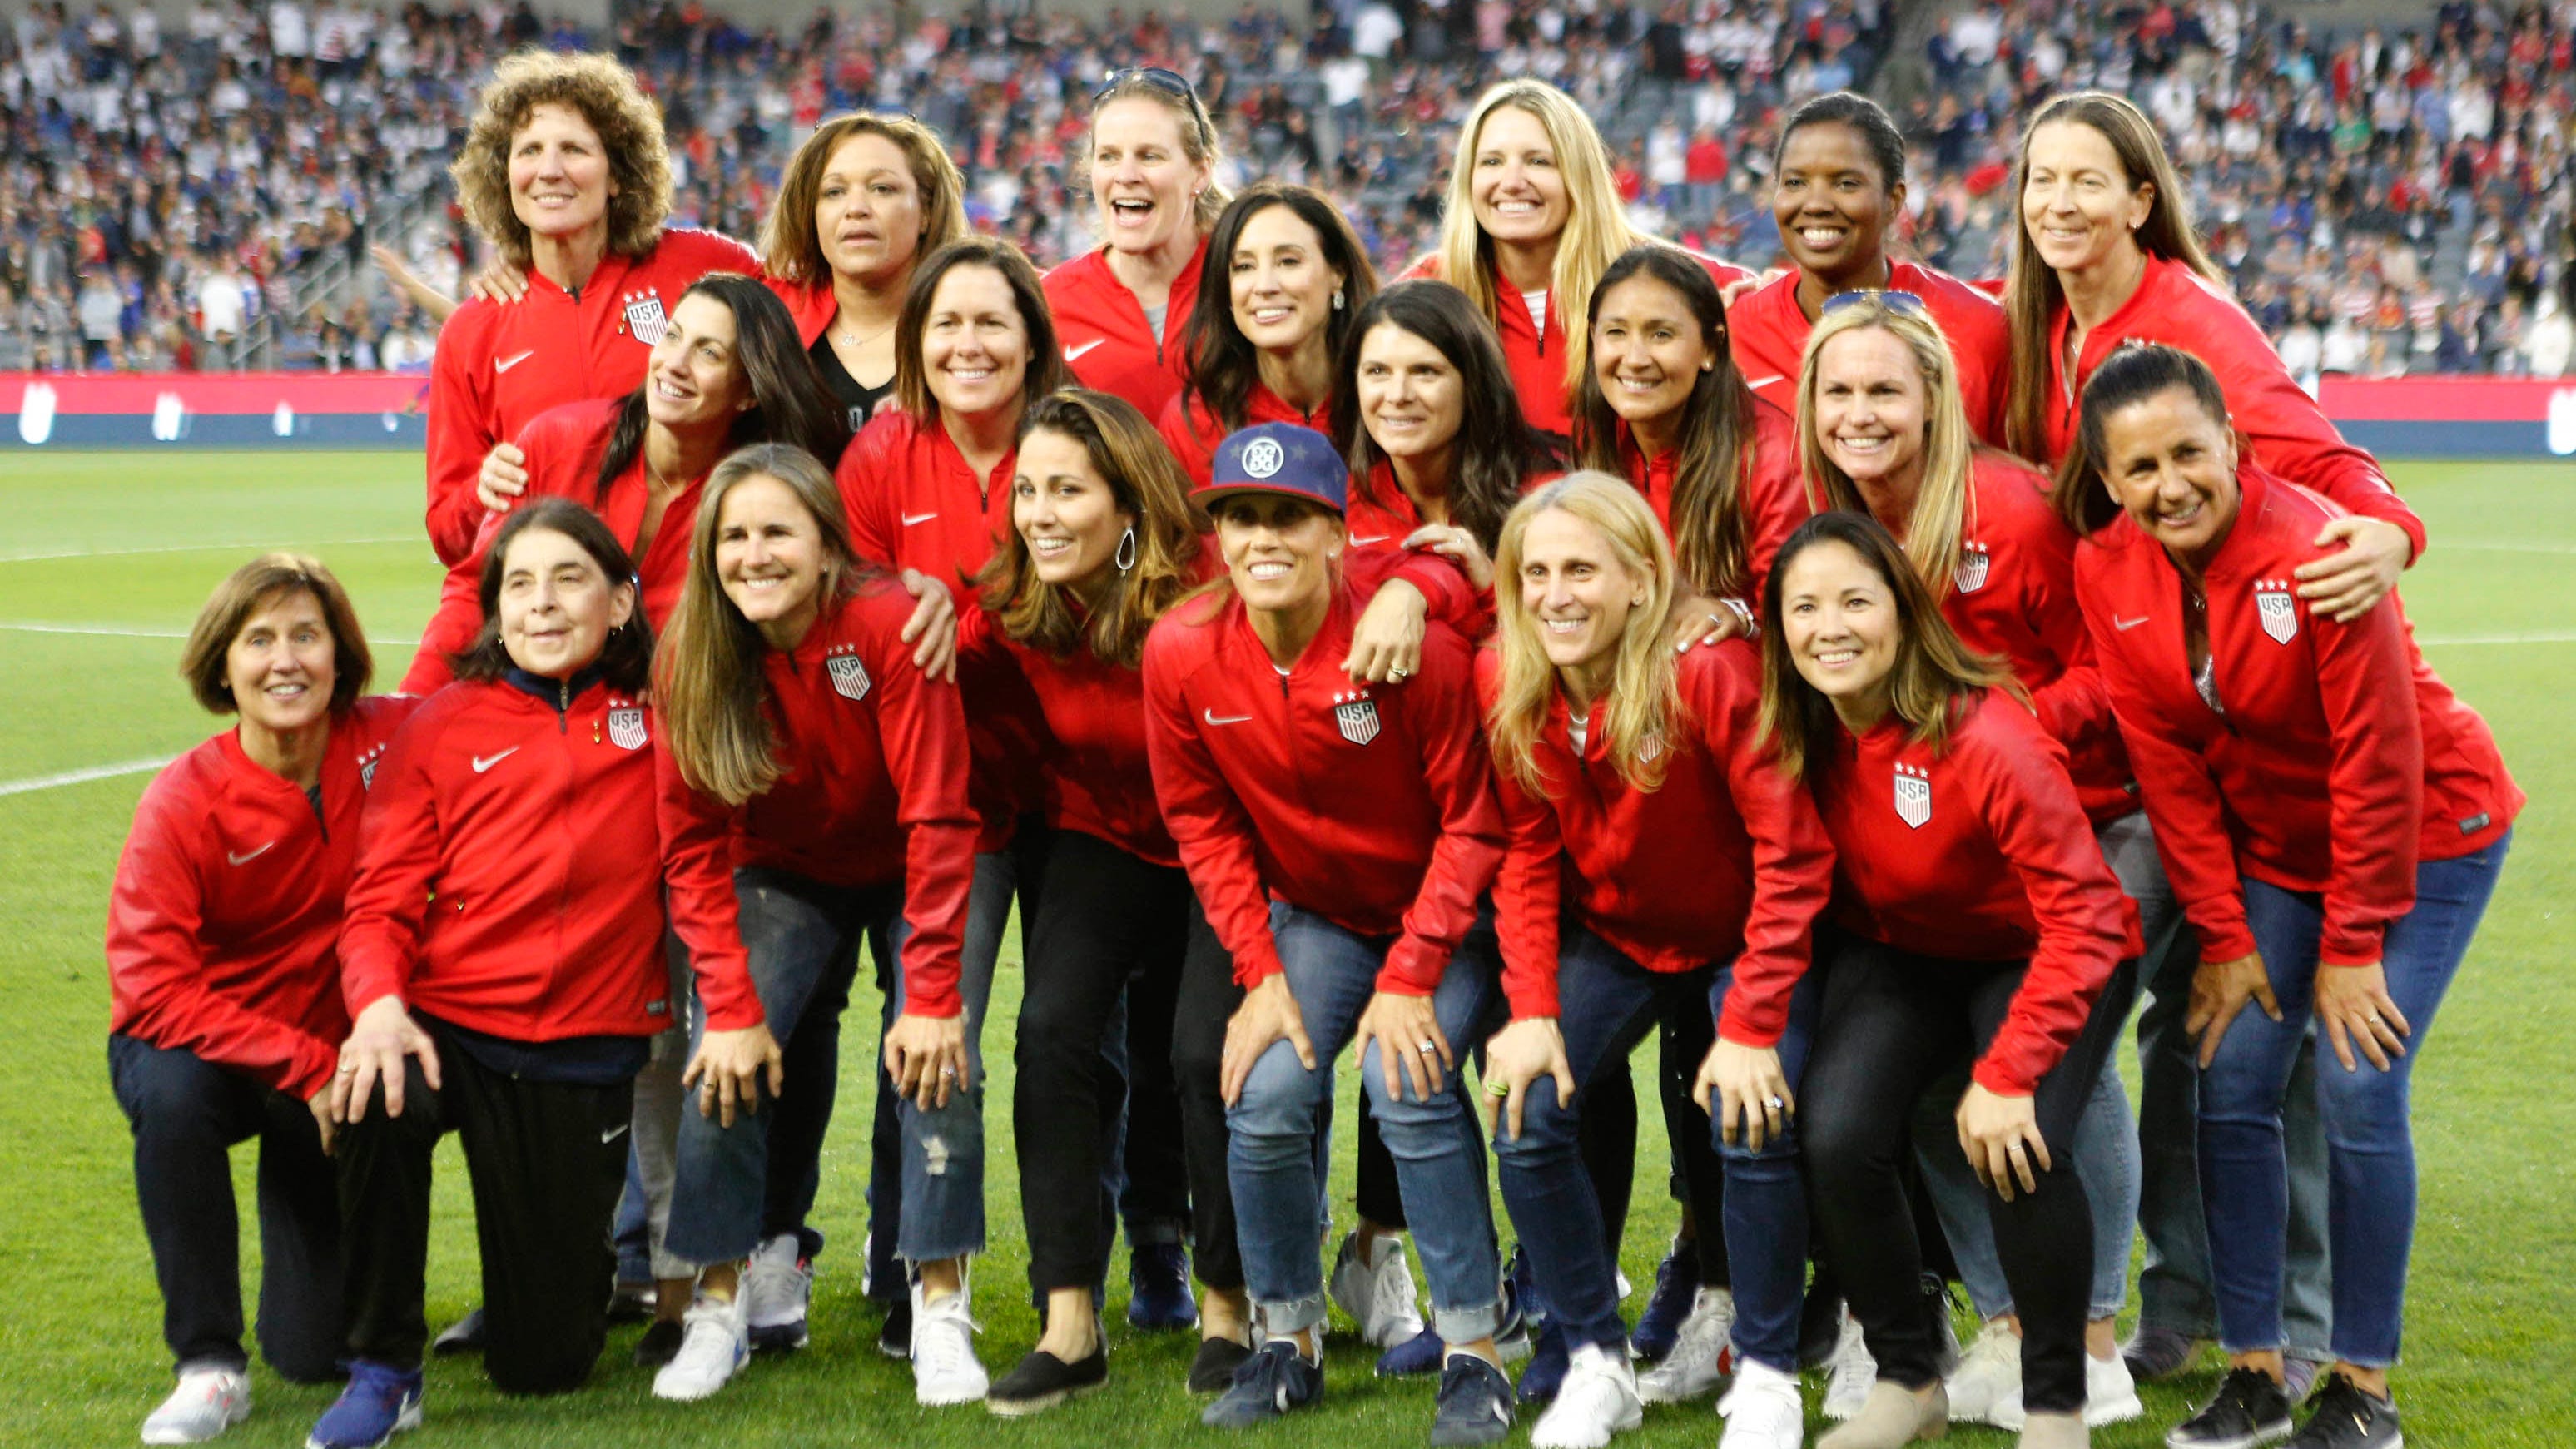 2019 World Cup: US women's soccer team changed the game 20 years ago